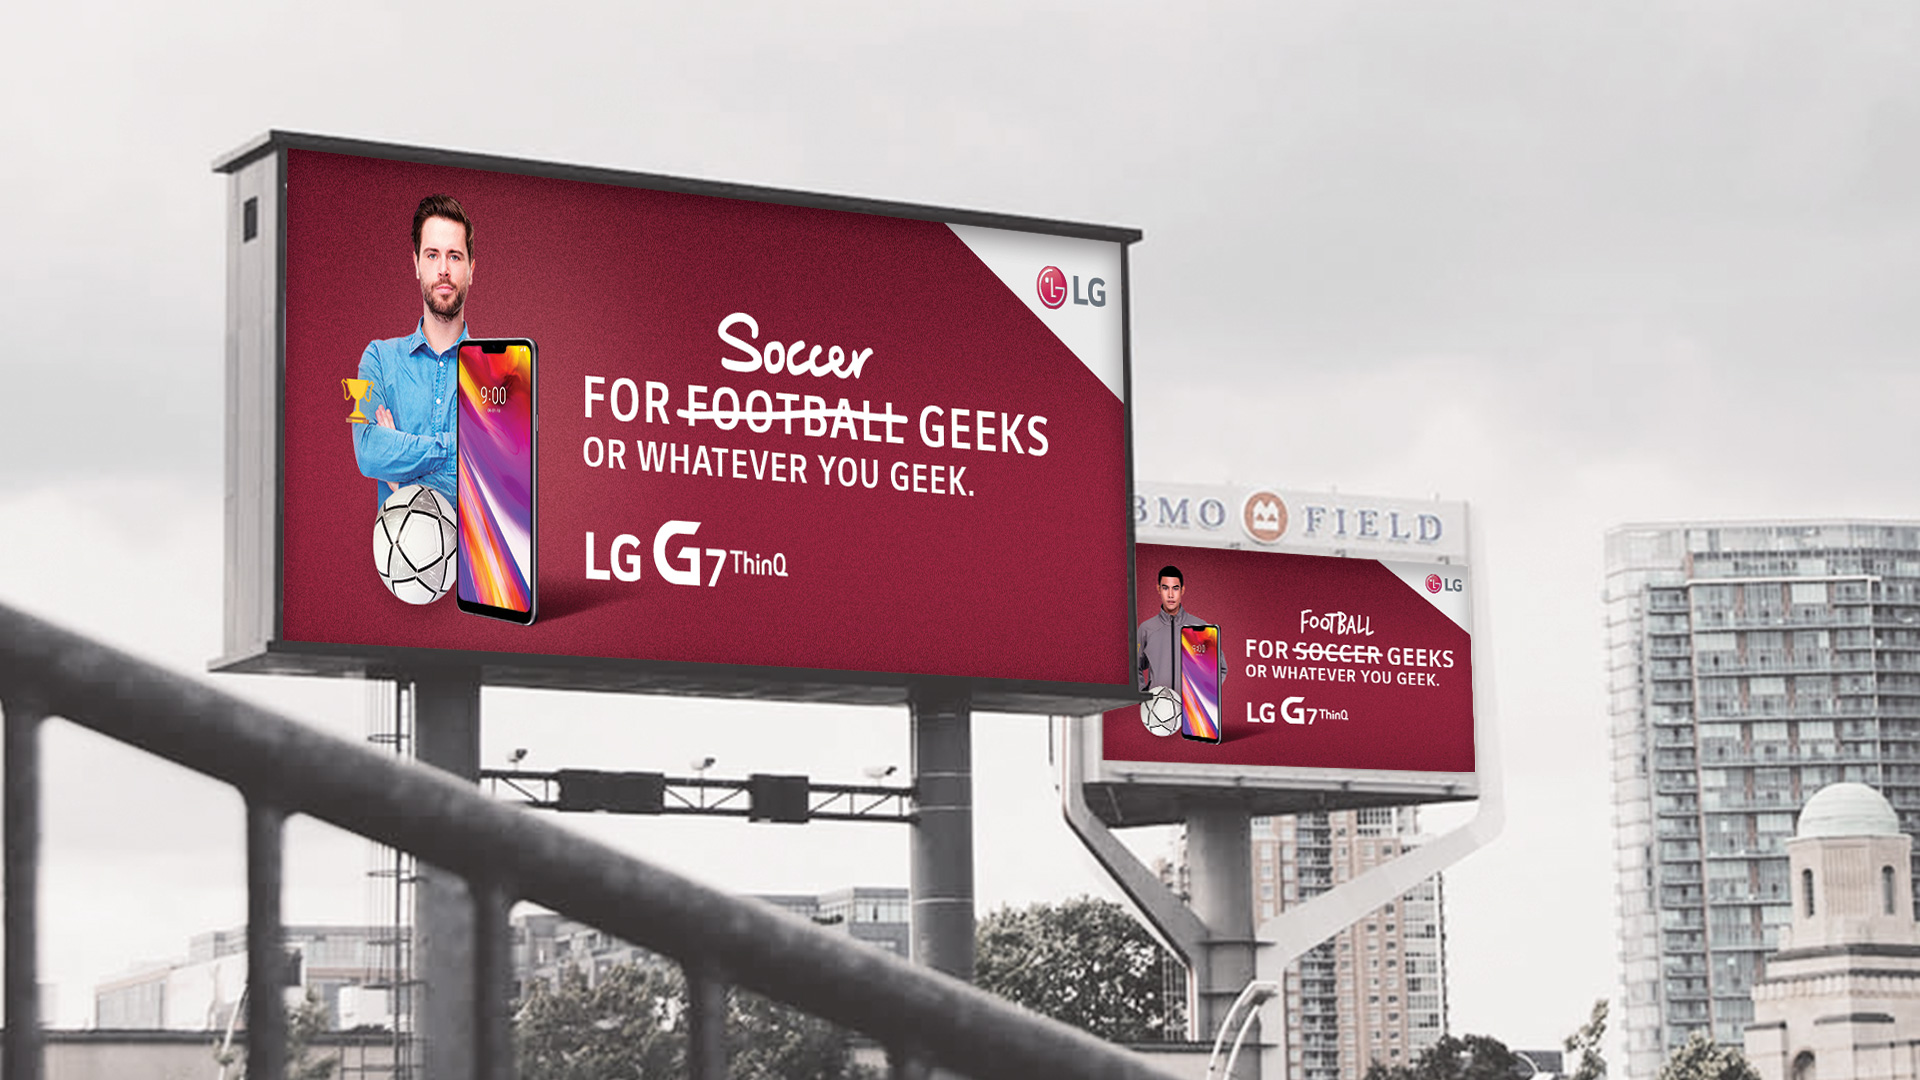 Two billboards. One reads “For Soccer Geeks,” but the word soccer is crossed out and replaced with football. The other billboard reads “For Football Geeks”, but the word football is crossed out and replaced with soccer.